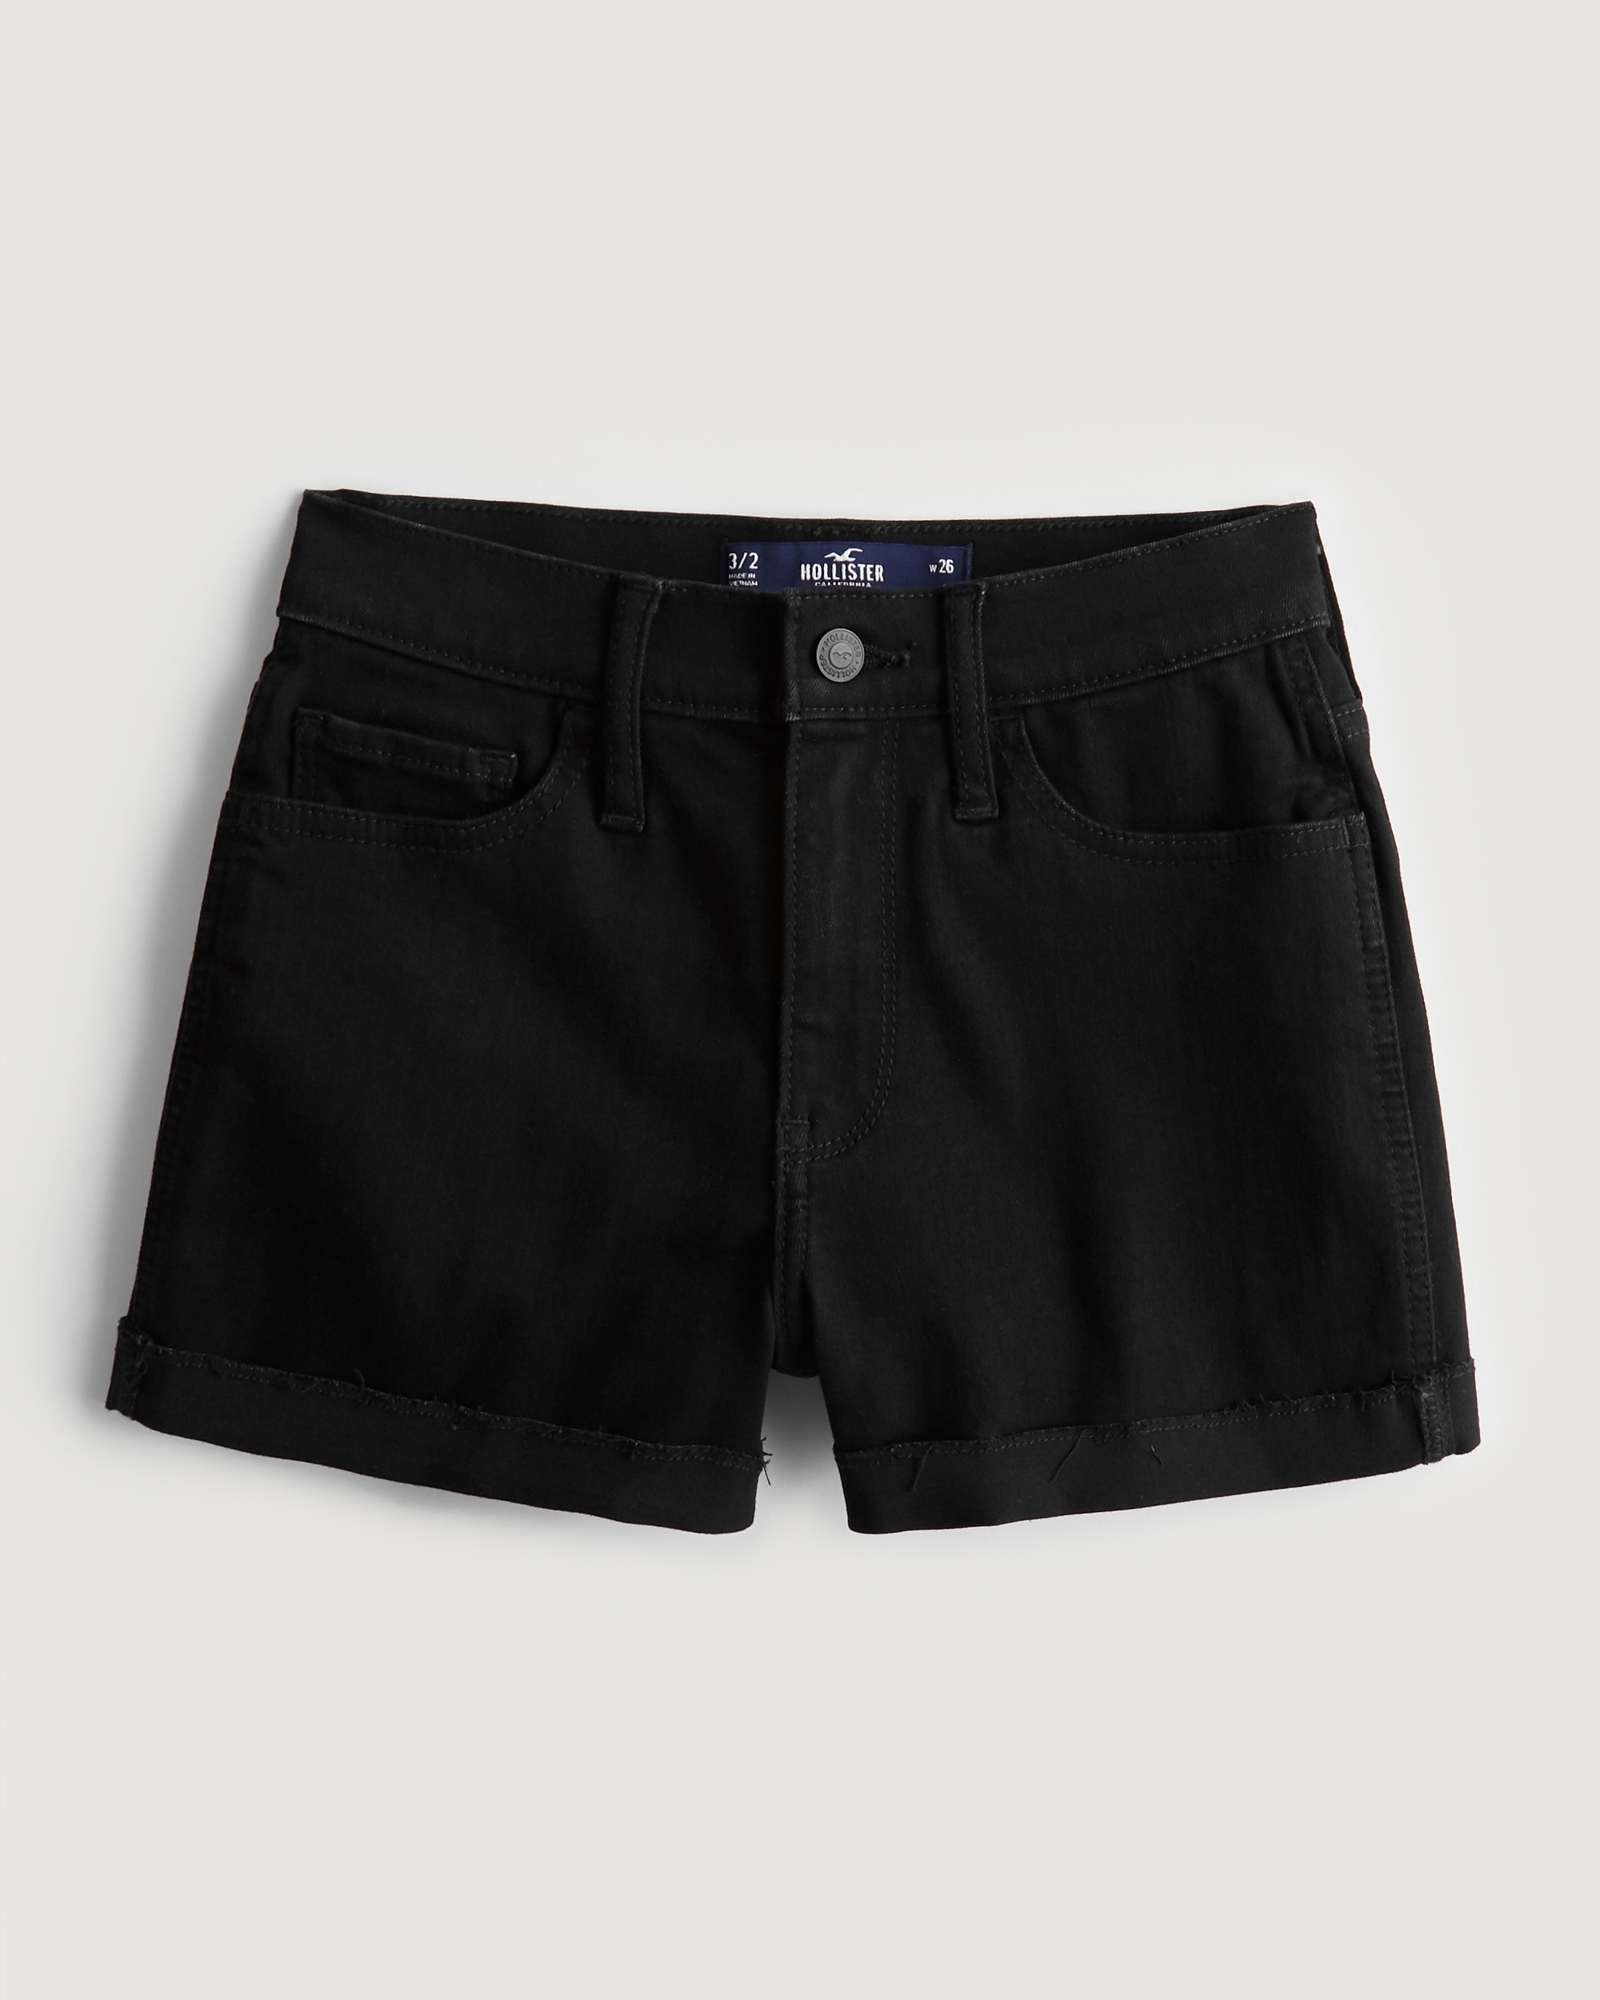 These versatile, black Hollister jean shorts are